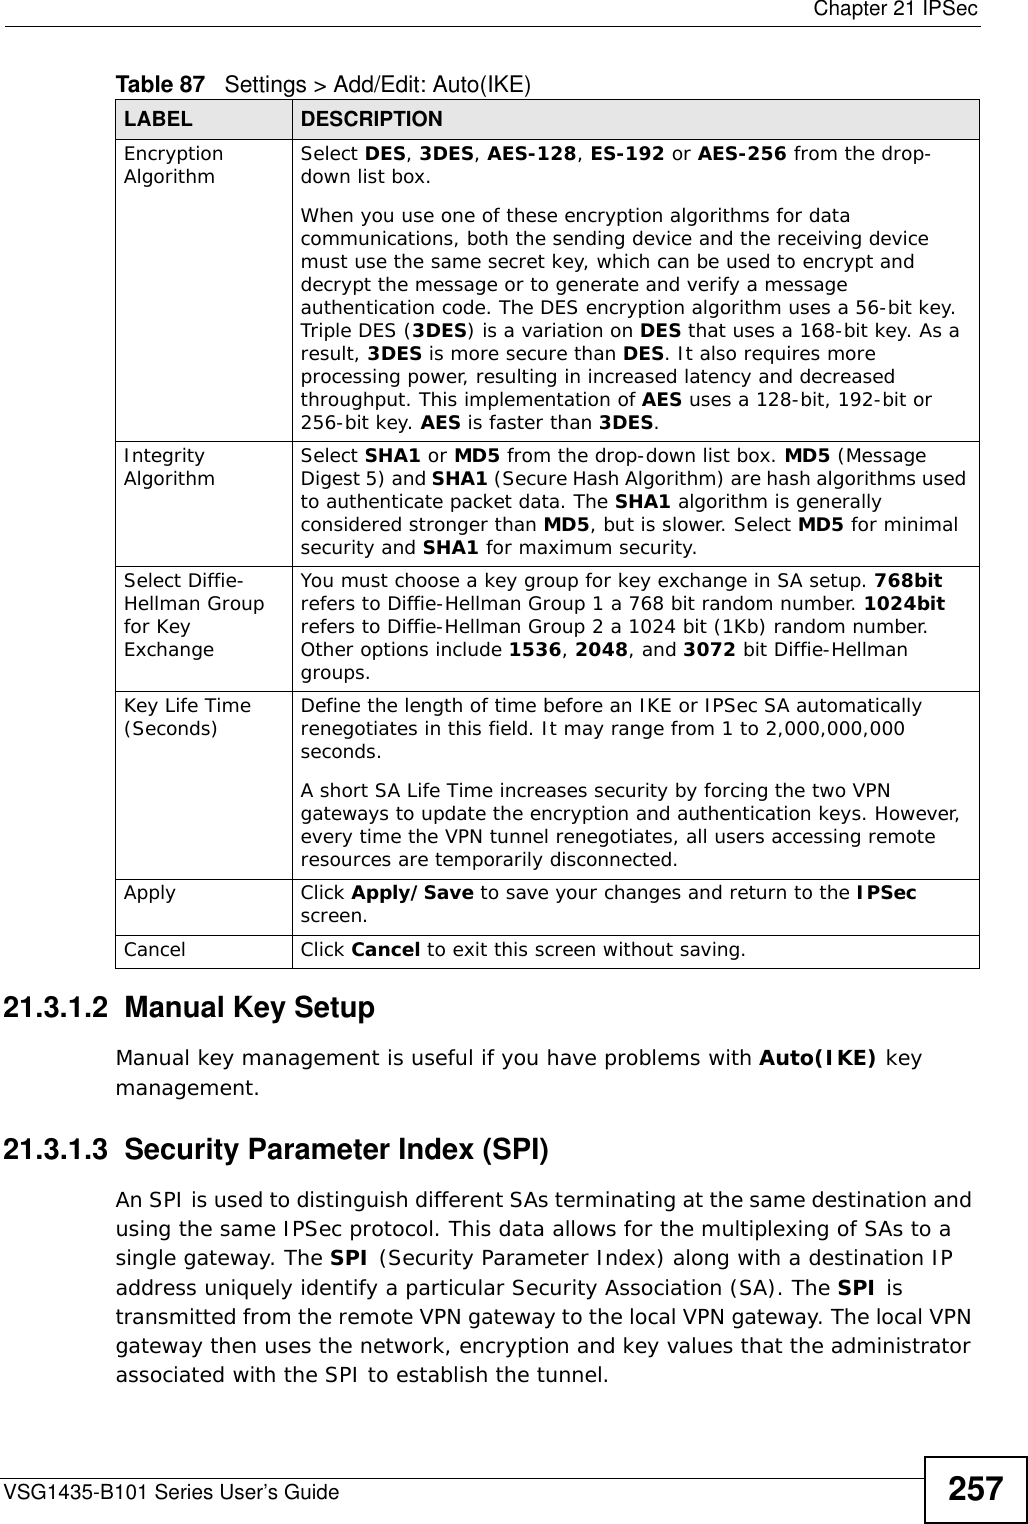  Chapter 21 IPSecVSG1435-B101 Series User’s Guide 25721.3.1.2  Manual Key SetupManual key management is useful if you have problems with Auto(IKE) key management.21.3.1.3  Security Parameter Index (SPI) An SPI is used to distinguish different SAs terminating at the same destination and using the same IPSec protocol. This data allows for the multiplexing of SAs to a single gateway. The SPI (Security Parameter Index) along with a destination IP address uniquely identify a particular Security Association (SA). The SPI is transmitted from the remote VPN gateway to the local VPN gateway. The local VPN gateway then uses the network, encryption and key values that the administrator associated with the SPI to establish the tunnel.Encryption Algorithm Select DES, 3DES, AES-128, ES-192 or AES-256 from the drop-down list box. When you use one of these encryption algorithms for data communications, both the sending device and the receiving device must use the same secret key, which can be used to encrypt and decrypt the message or to generate and verify a message authentication code. The DES encryption algorithm uses a 56-bit key. Triple DES (3DES) is a variation on DES that uses a 168-bit key. As a result, 3DES is more secure than DES. It also requires more processing power, resulting in increased latency and decreased throughput. This implementation of AES uses a 128-bit, 192-bit or 256-bit key. AES is faster than 3DES. Integrity Algorithm Select SHA1 or MD5 from the drop-down list box. MD5 (Message Digest 5) and SHA1 (Secure Hash Algorithm) are hash algorithms used to authenticate packet data. The SHA1 algorithm is generally considered stronger than MD5, but is slower. Select MD5 for minimal security and SHA1 for maximum security. Select Diffie-Hellman Group for Key ExchangeYou must choose a key group for key exchange in SA setup. 768bit refers to Diffie-Hellman Group 1 a 768 bit random number. 1024bit refers to Diffie-Hellman Group 2 a 1024 bit (1Kb) random number.  Other options include 1536, 2048, and 3072 bit Diffie-Hellman groups.Key Life Time (Seconds) Define the length of time before an IKE or IPSec SA automatically renegotiates in this field. It may range from 1 to 2,000,000,000 seconds.A short SA Life Time increases security by forcing the two VPN gateways to update the encryption and authentication keys. However, every time the VPN tunnel renegotiates, all users accessing remote resources are temporarily disconnected. Apply Click Apply/Save to save your changes and return to the IPSec screen.Cancel Click Cancel to exit this screen without saving.Table 87   Settings &gt; Add/Edit: Auto(IKE)LABEL DESCRIPTION